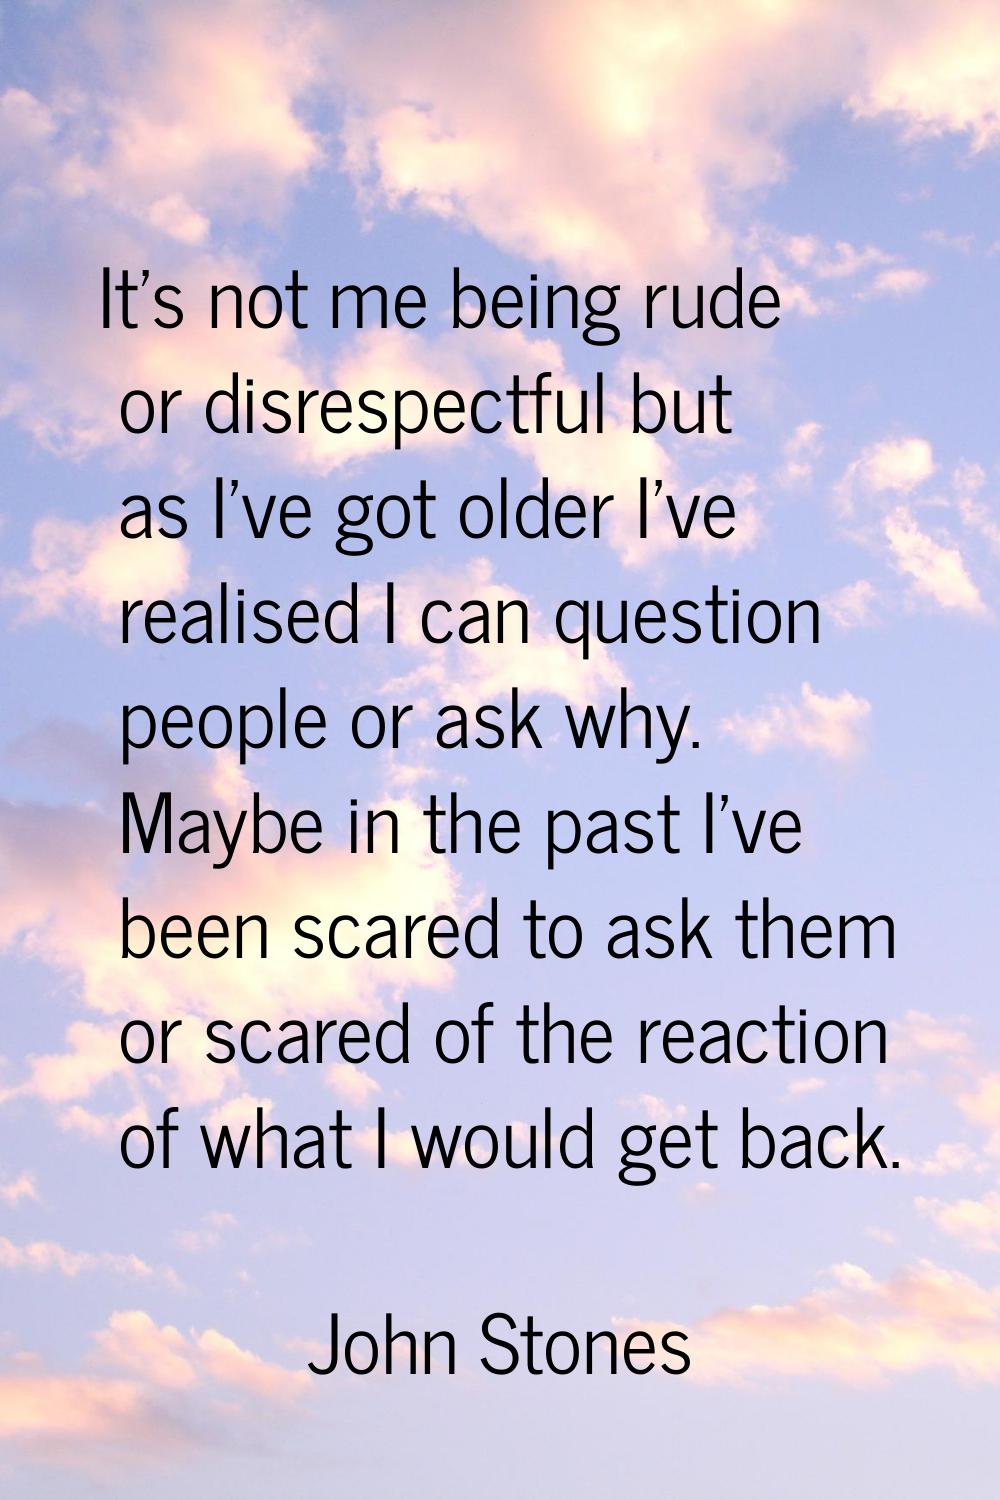 It's not me being rude or disrespectful but as I've got older I've realised I can question people o